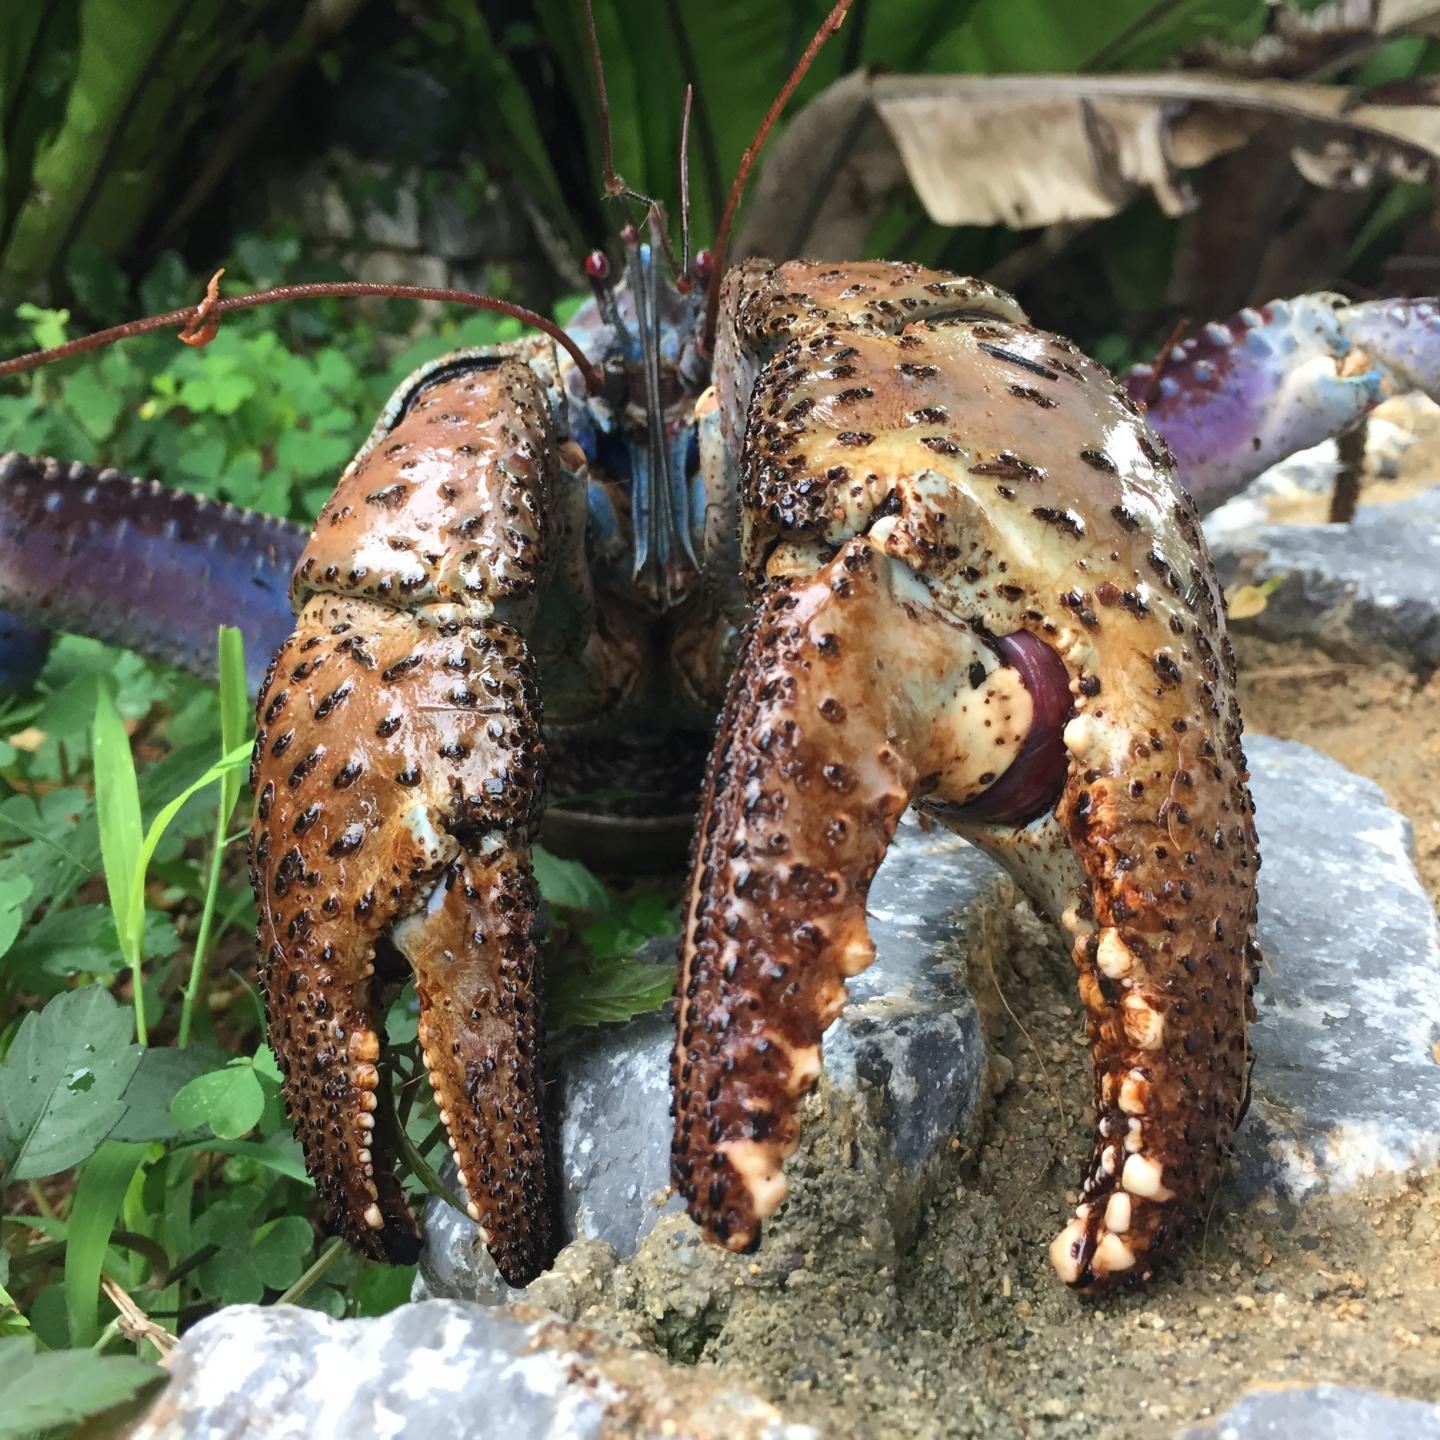 Coconut Crab Claws Pinch with the Strongest Force of Any Crustacean